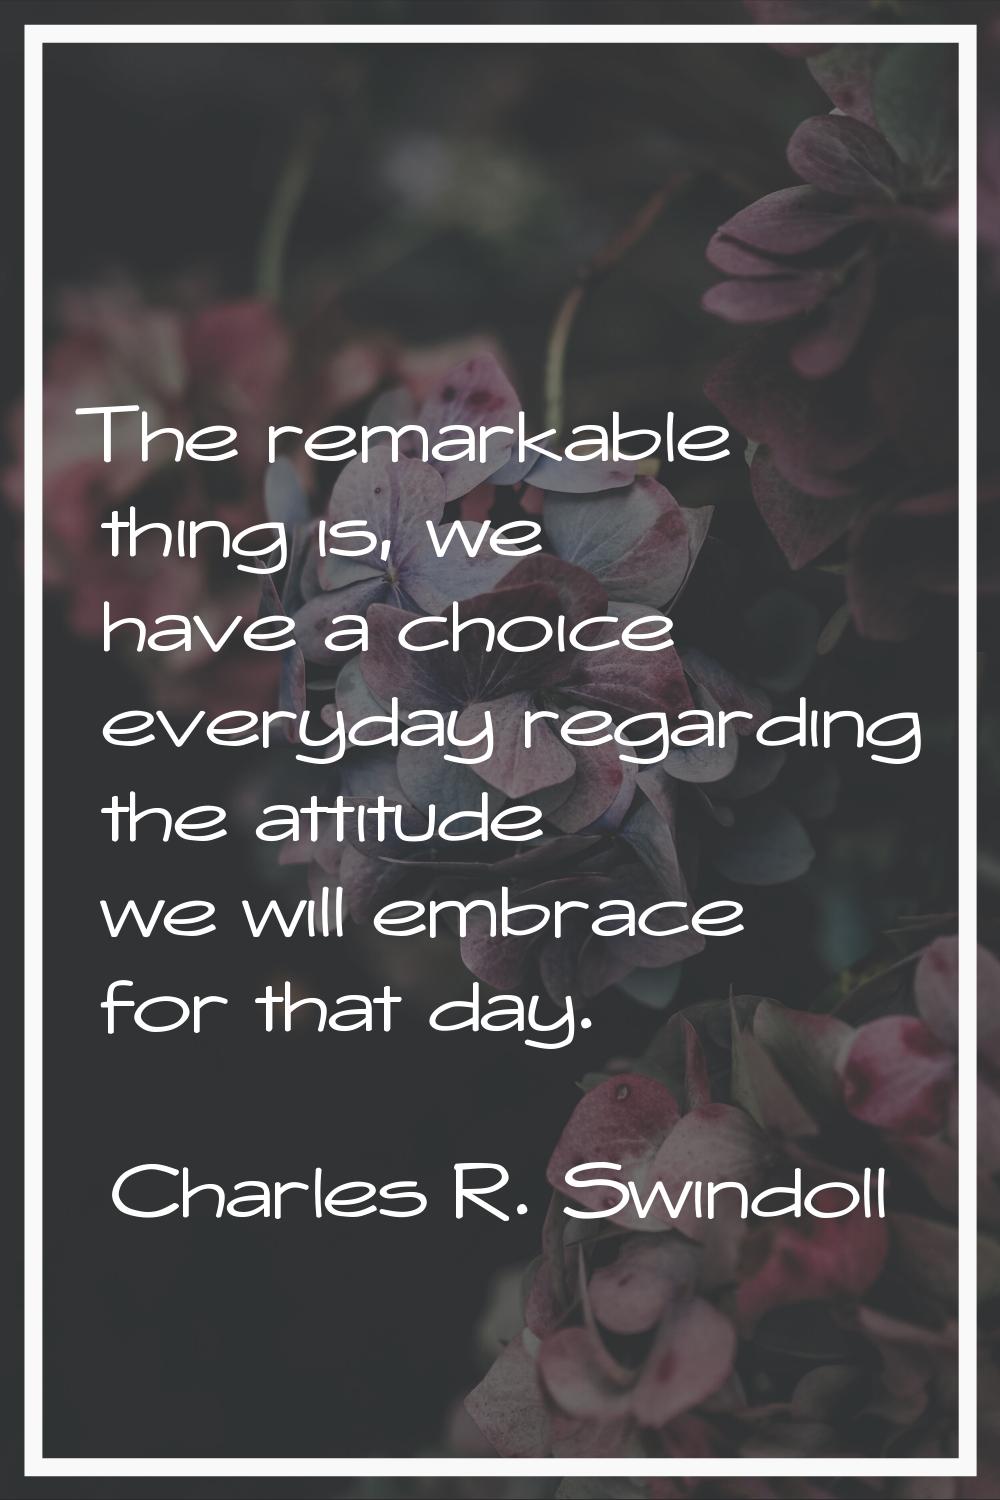 The remarkable thing is, we have a choice everyday regarding the attitude we will embrace for that 